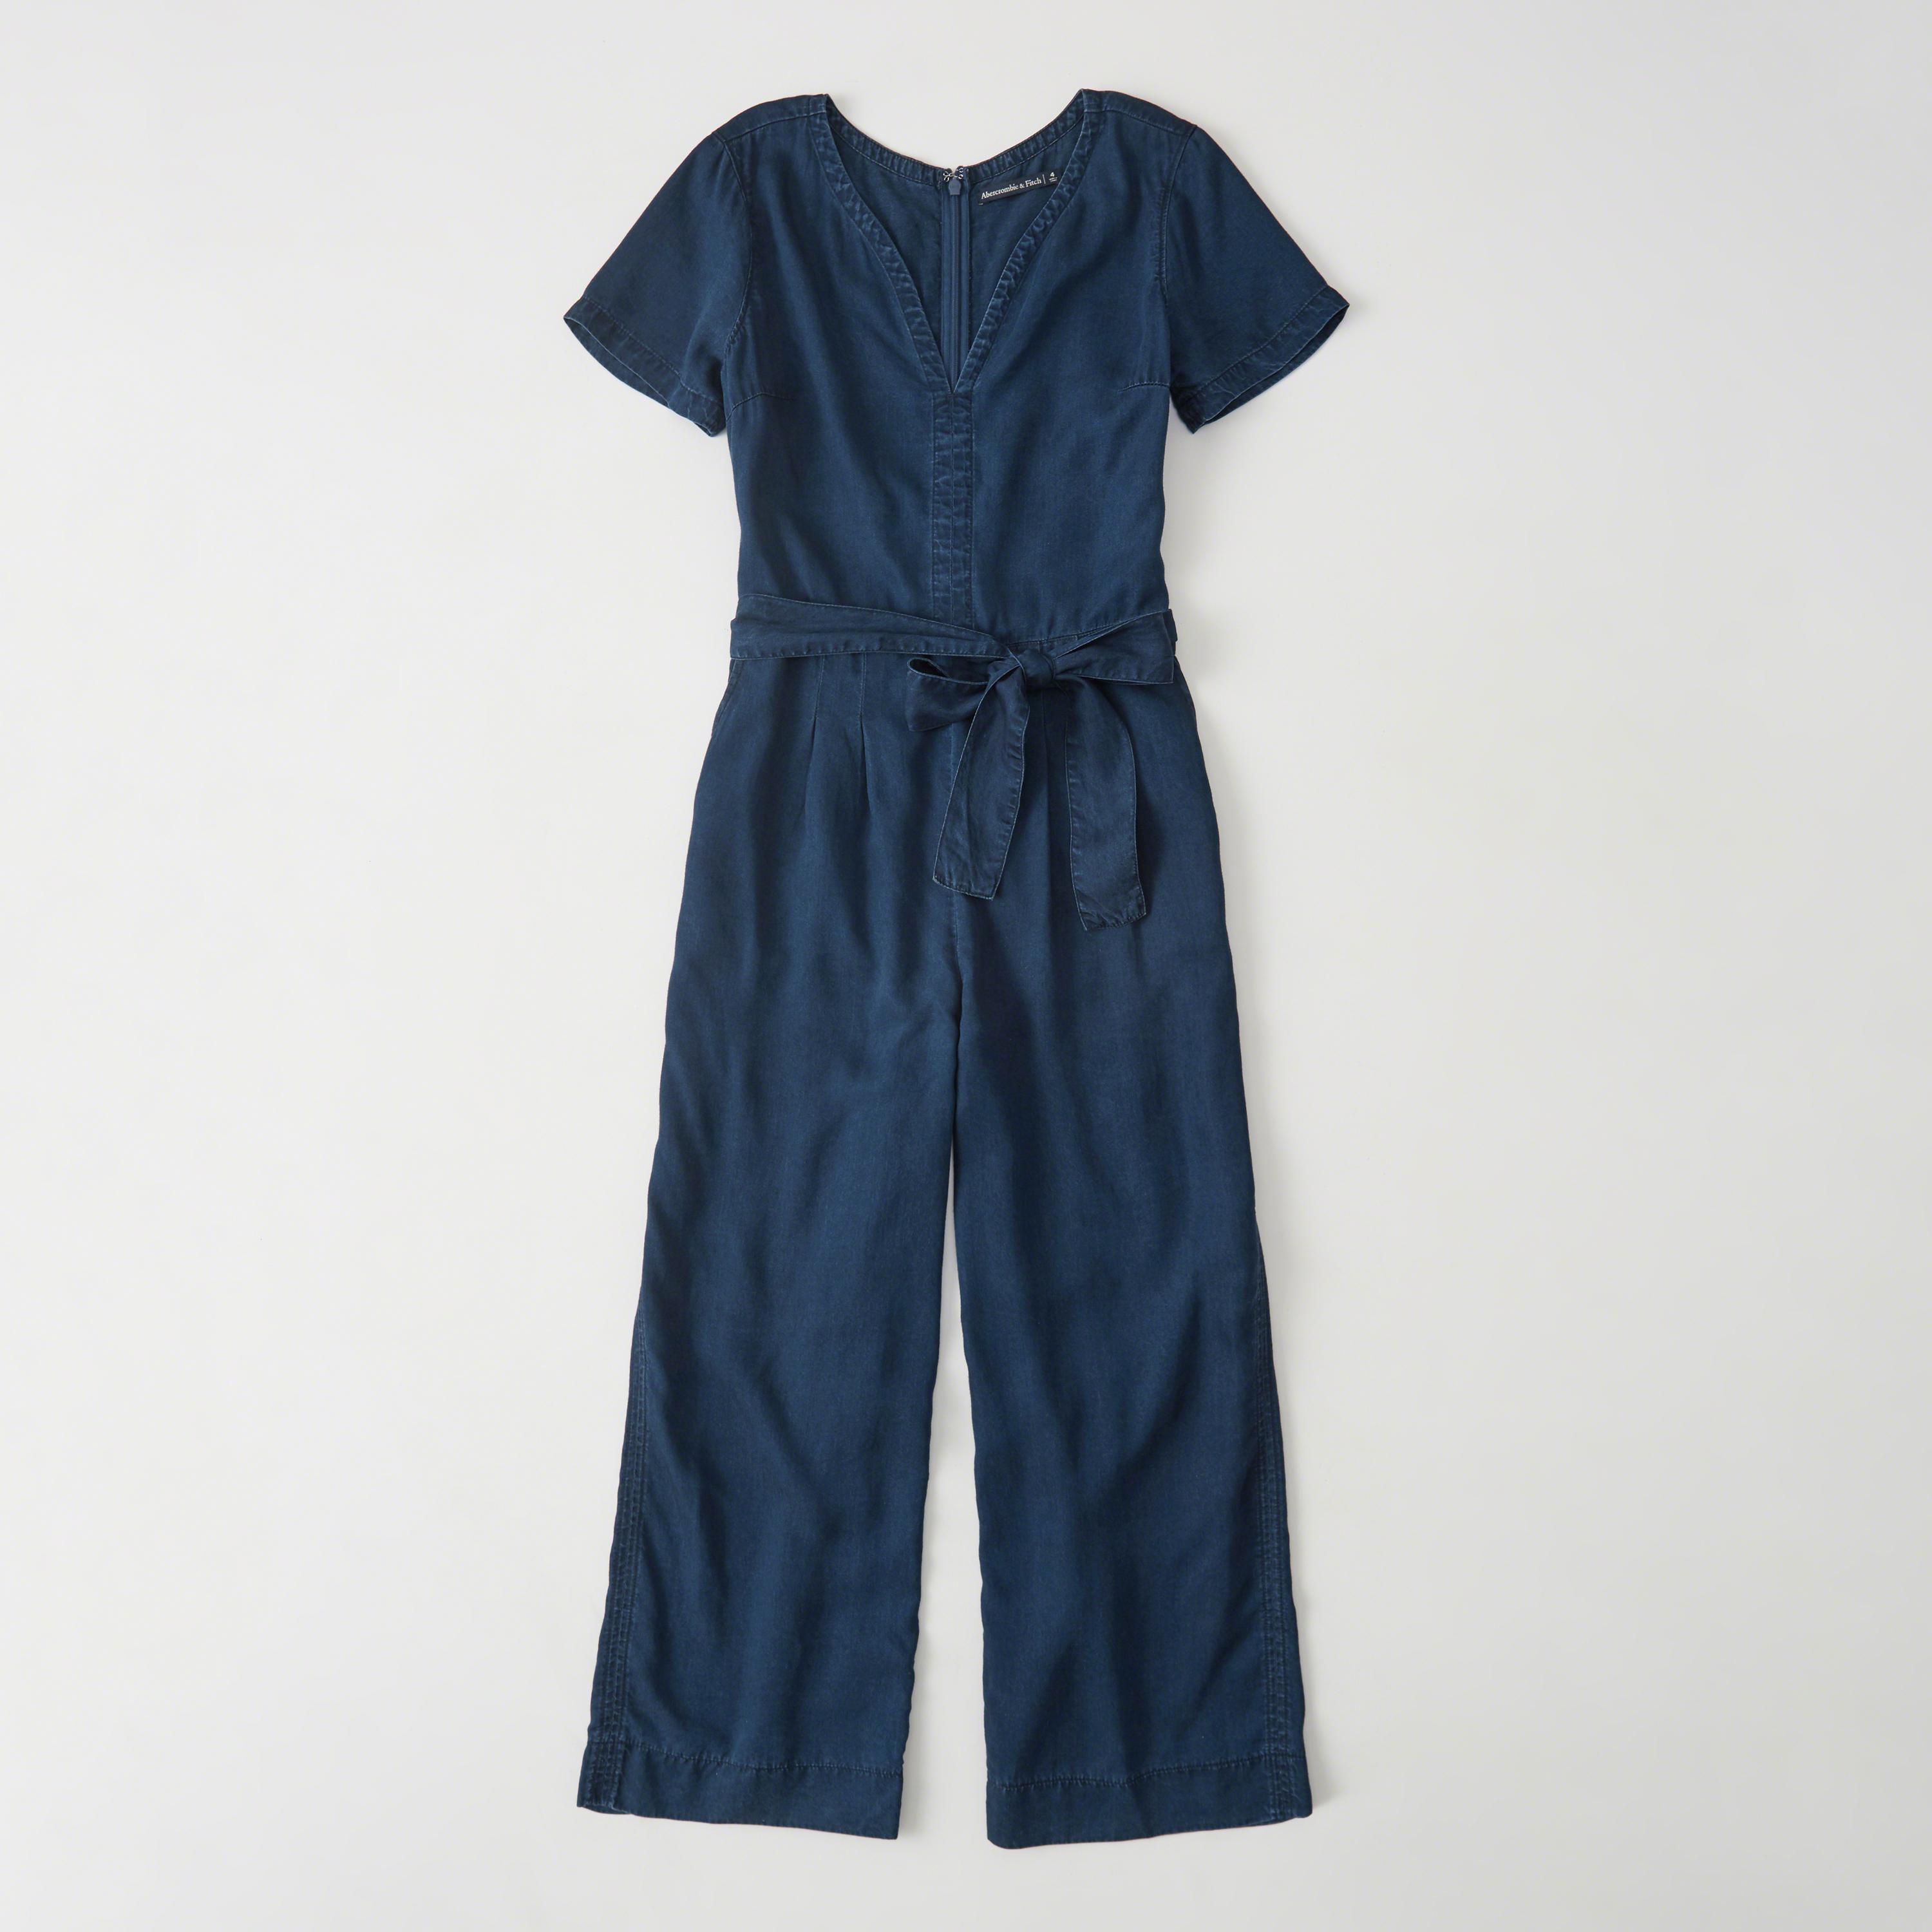 Lyst - Abercrombie & Fitch Short-sleeve Denim Jumpsuit in Blue - Save 16%